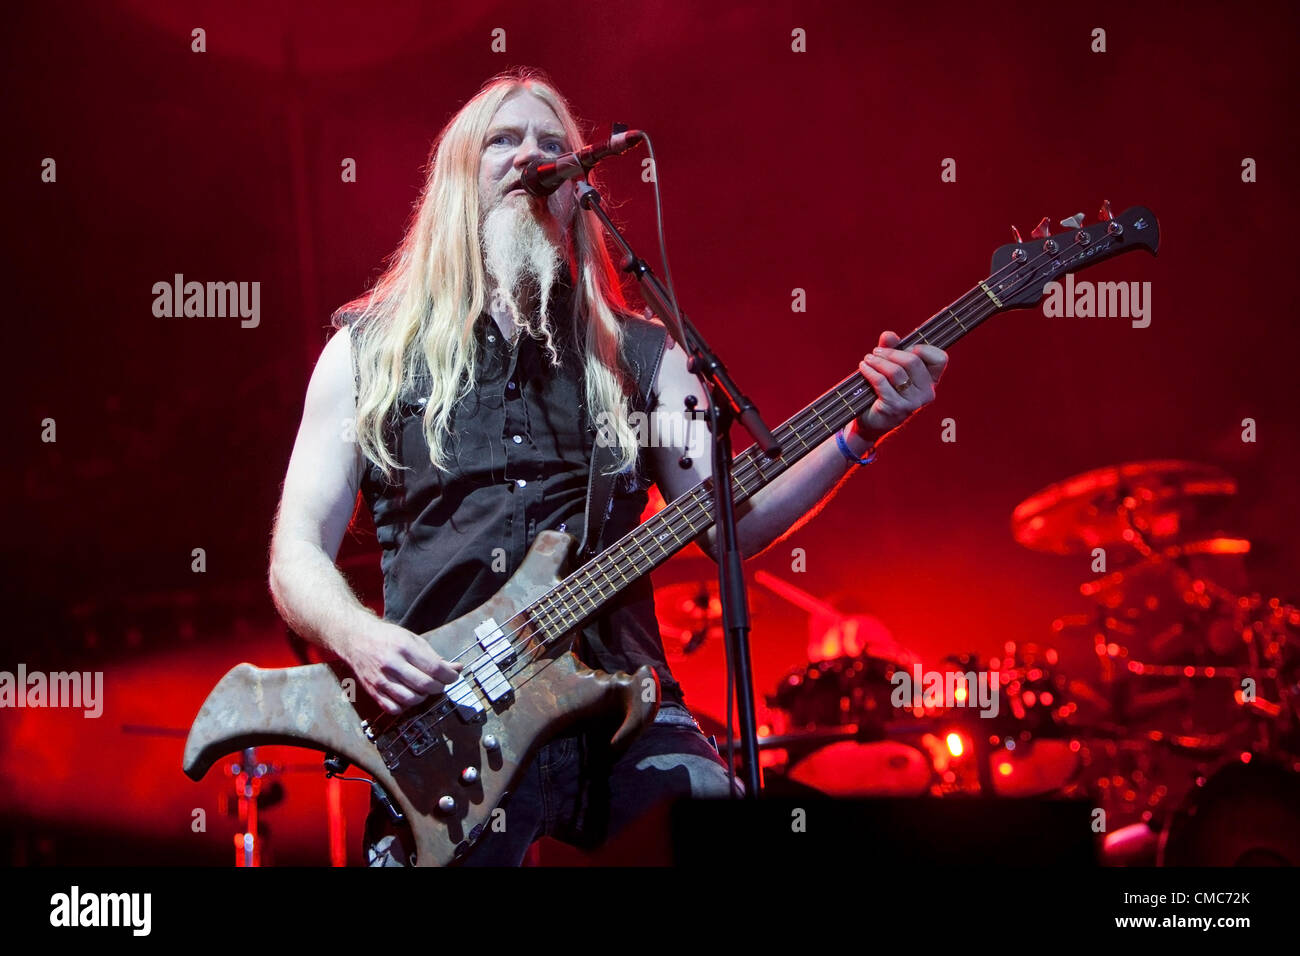 Marco Hietala of group Nightwish from Finland performs during the International music festival Masters of Rock in Vizovice, Czech Republic, on Sunday, July 15, 2012. (CTK Photo/Josef Omelka) Stock Photo